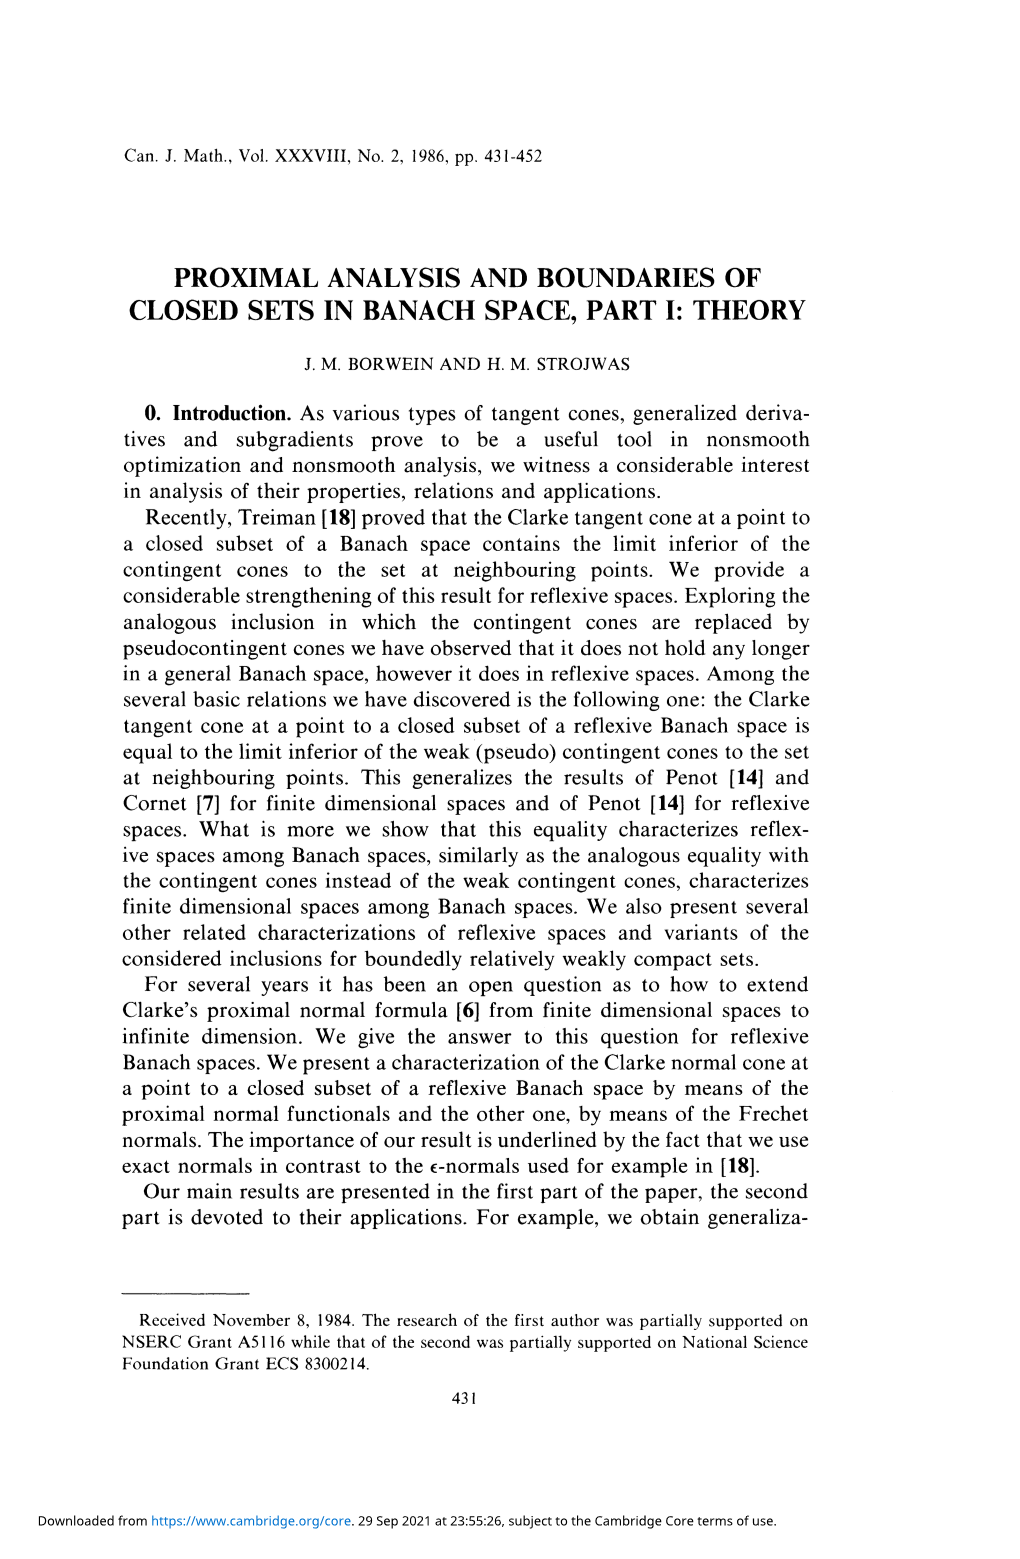 Proximal Analysis and Boundaries of Closed Sets in Banach Space, Part I: Theory